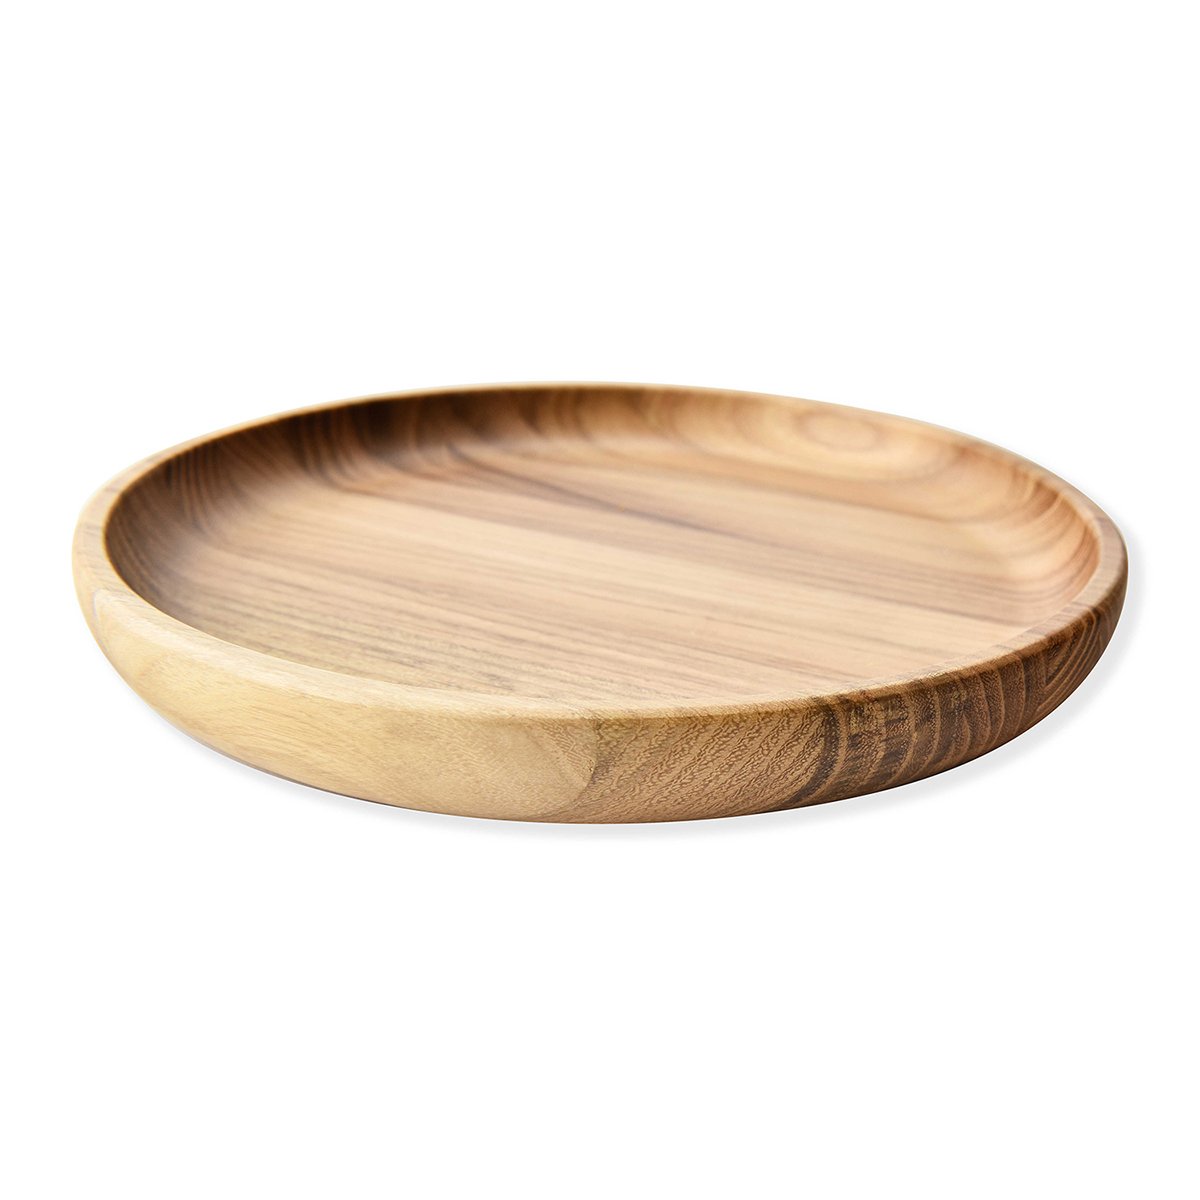 Wooden Round Tray for Serving & Decor - Small Size | Multiple Uses and Decoration BH5561